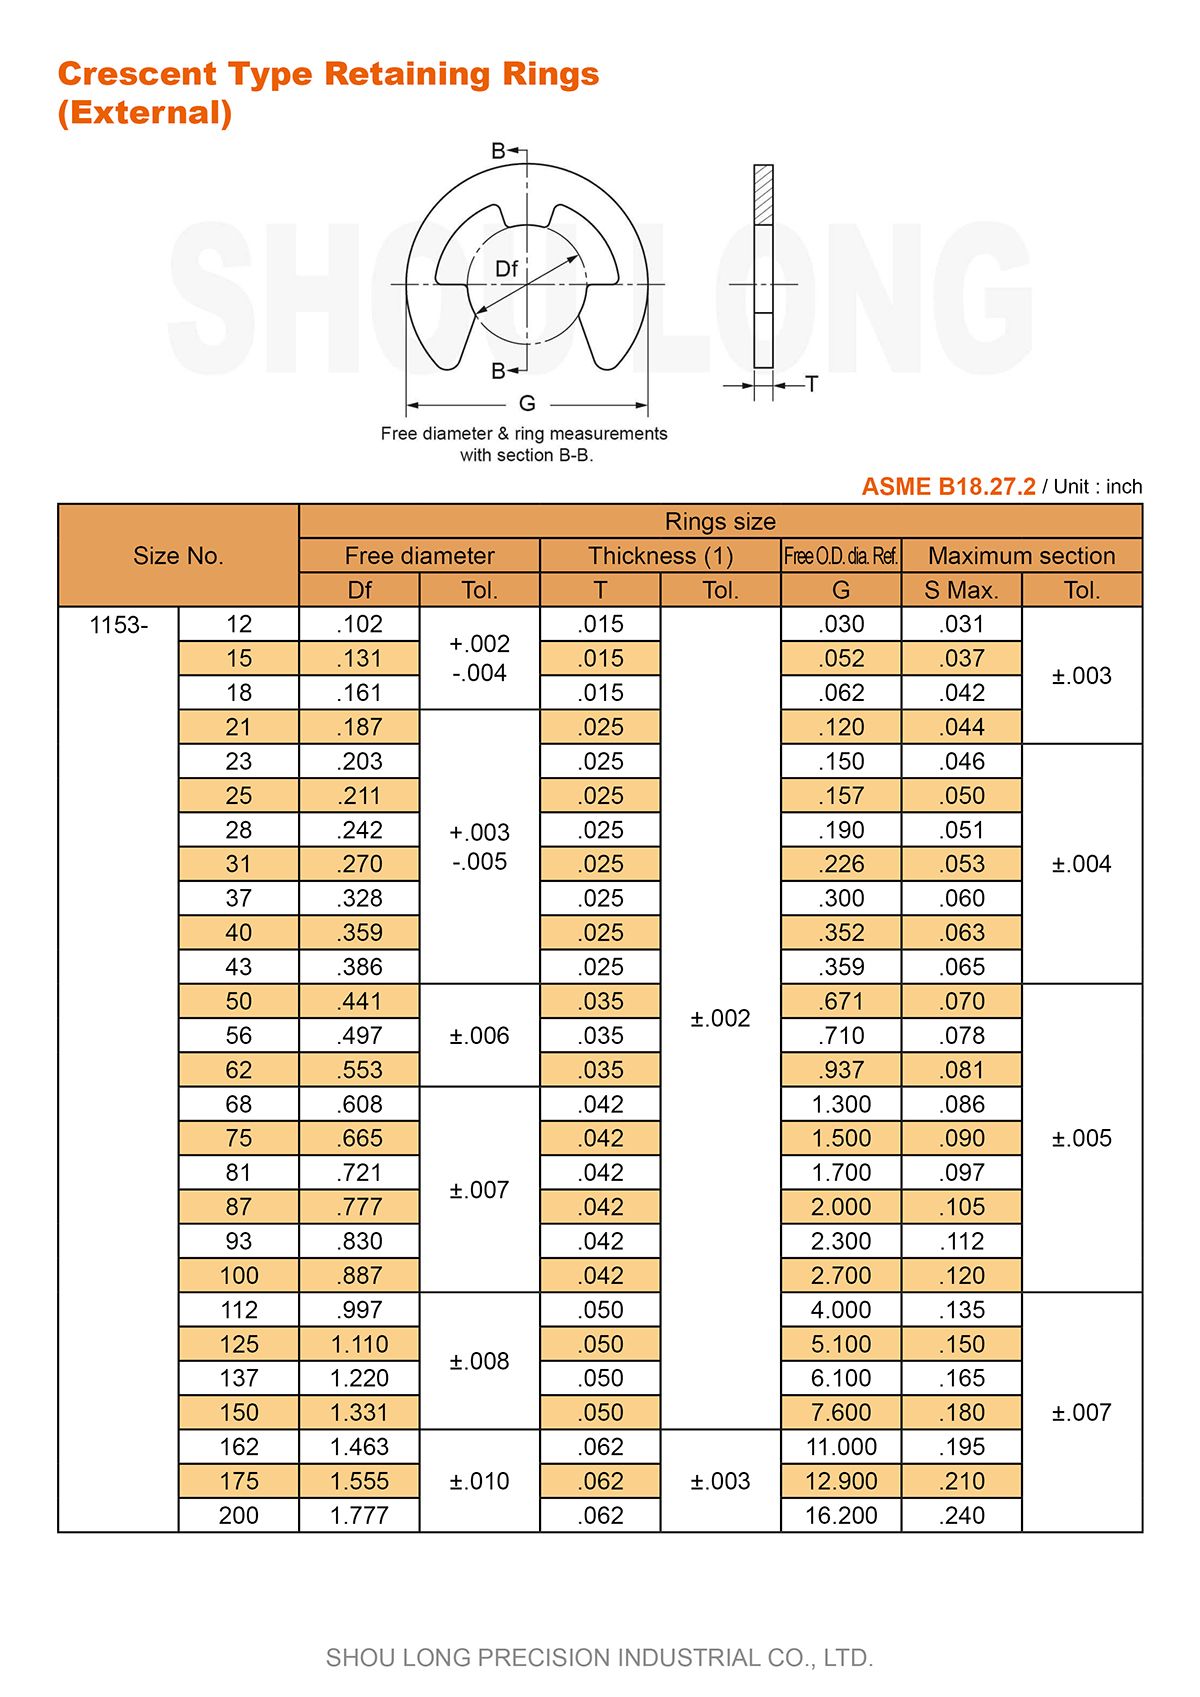 Spec of Inch Crescent Type Retaining Rings for Shaft ASME/ANSI B18.27.2 - 1